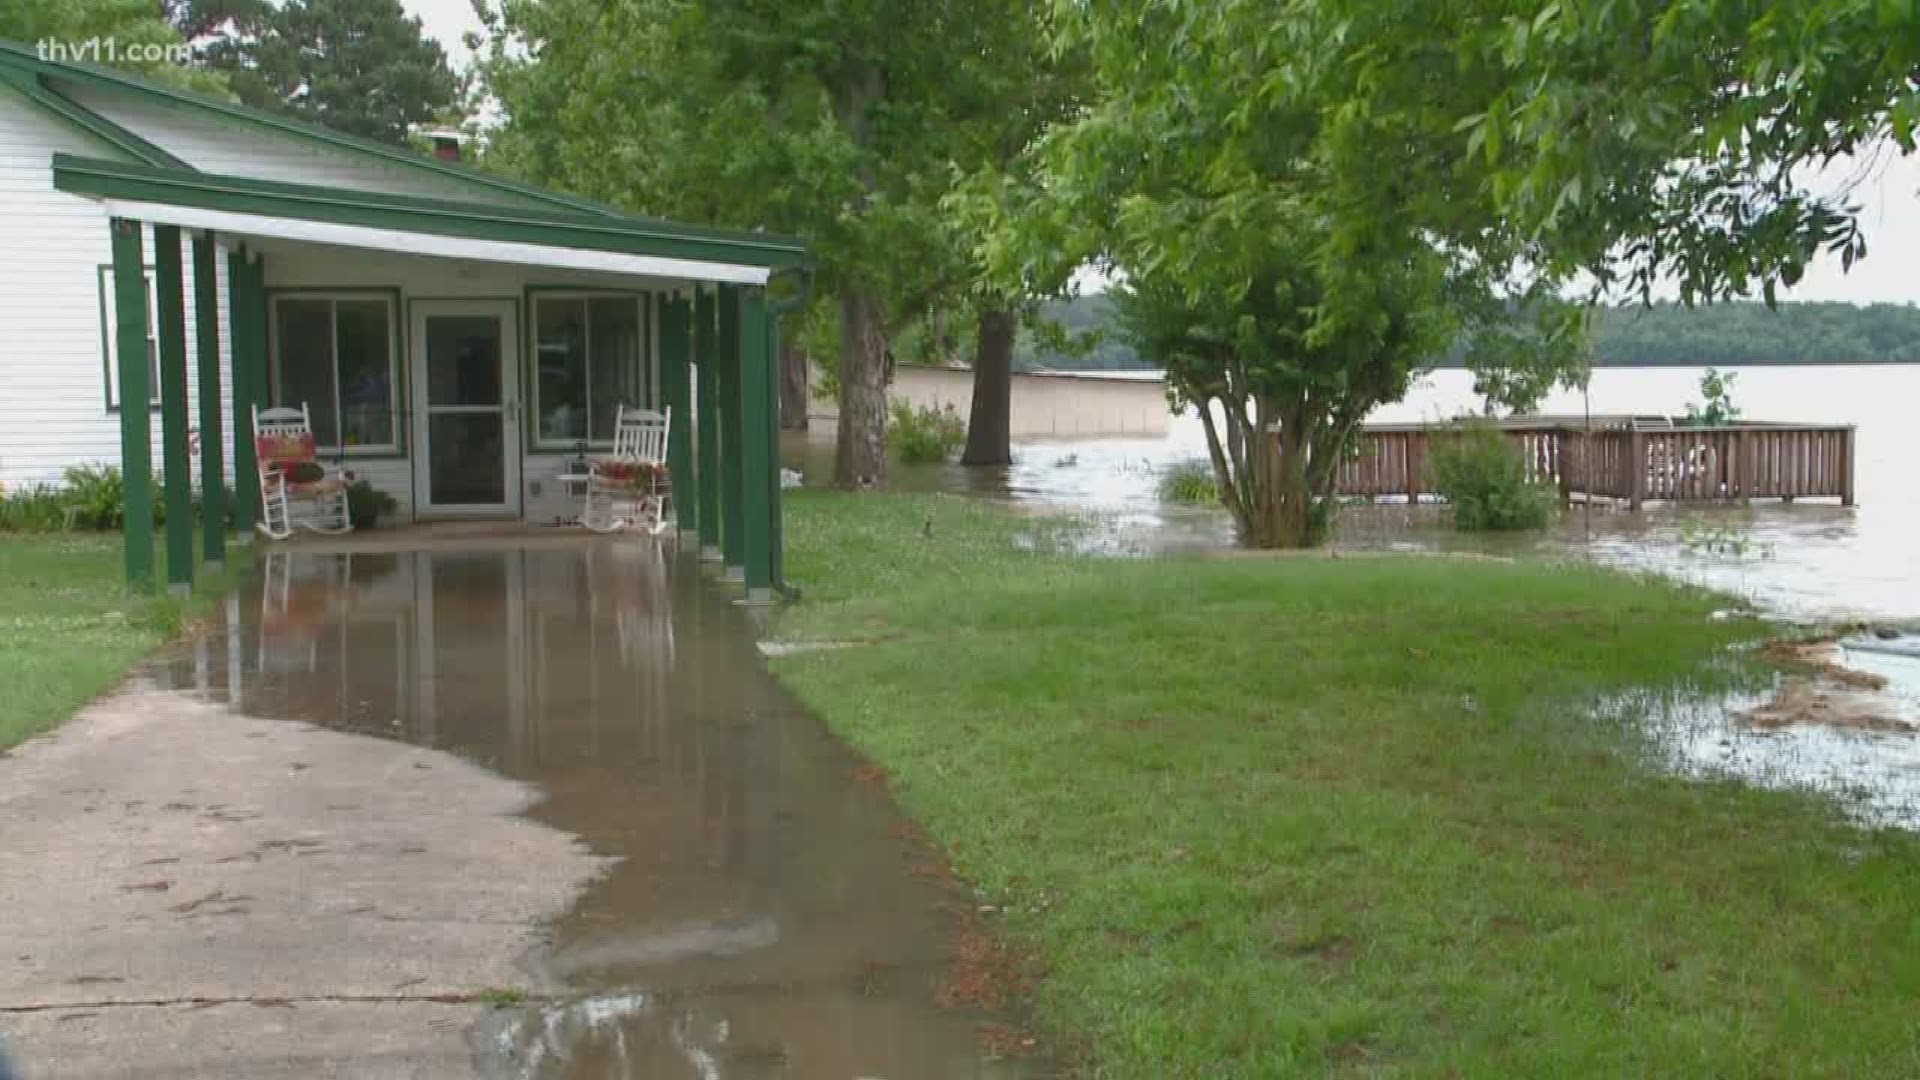 Currently, there is no water inside this woman's home, but within the next few days, that could be a completely different story as the water creeps closer to land here at lake Conway."